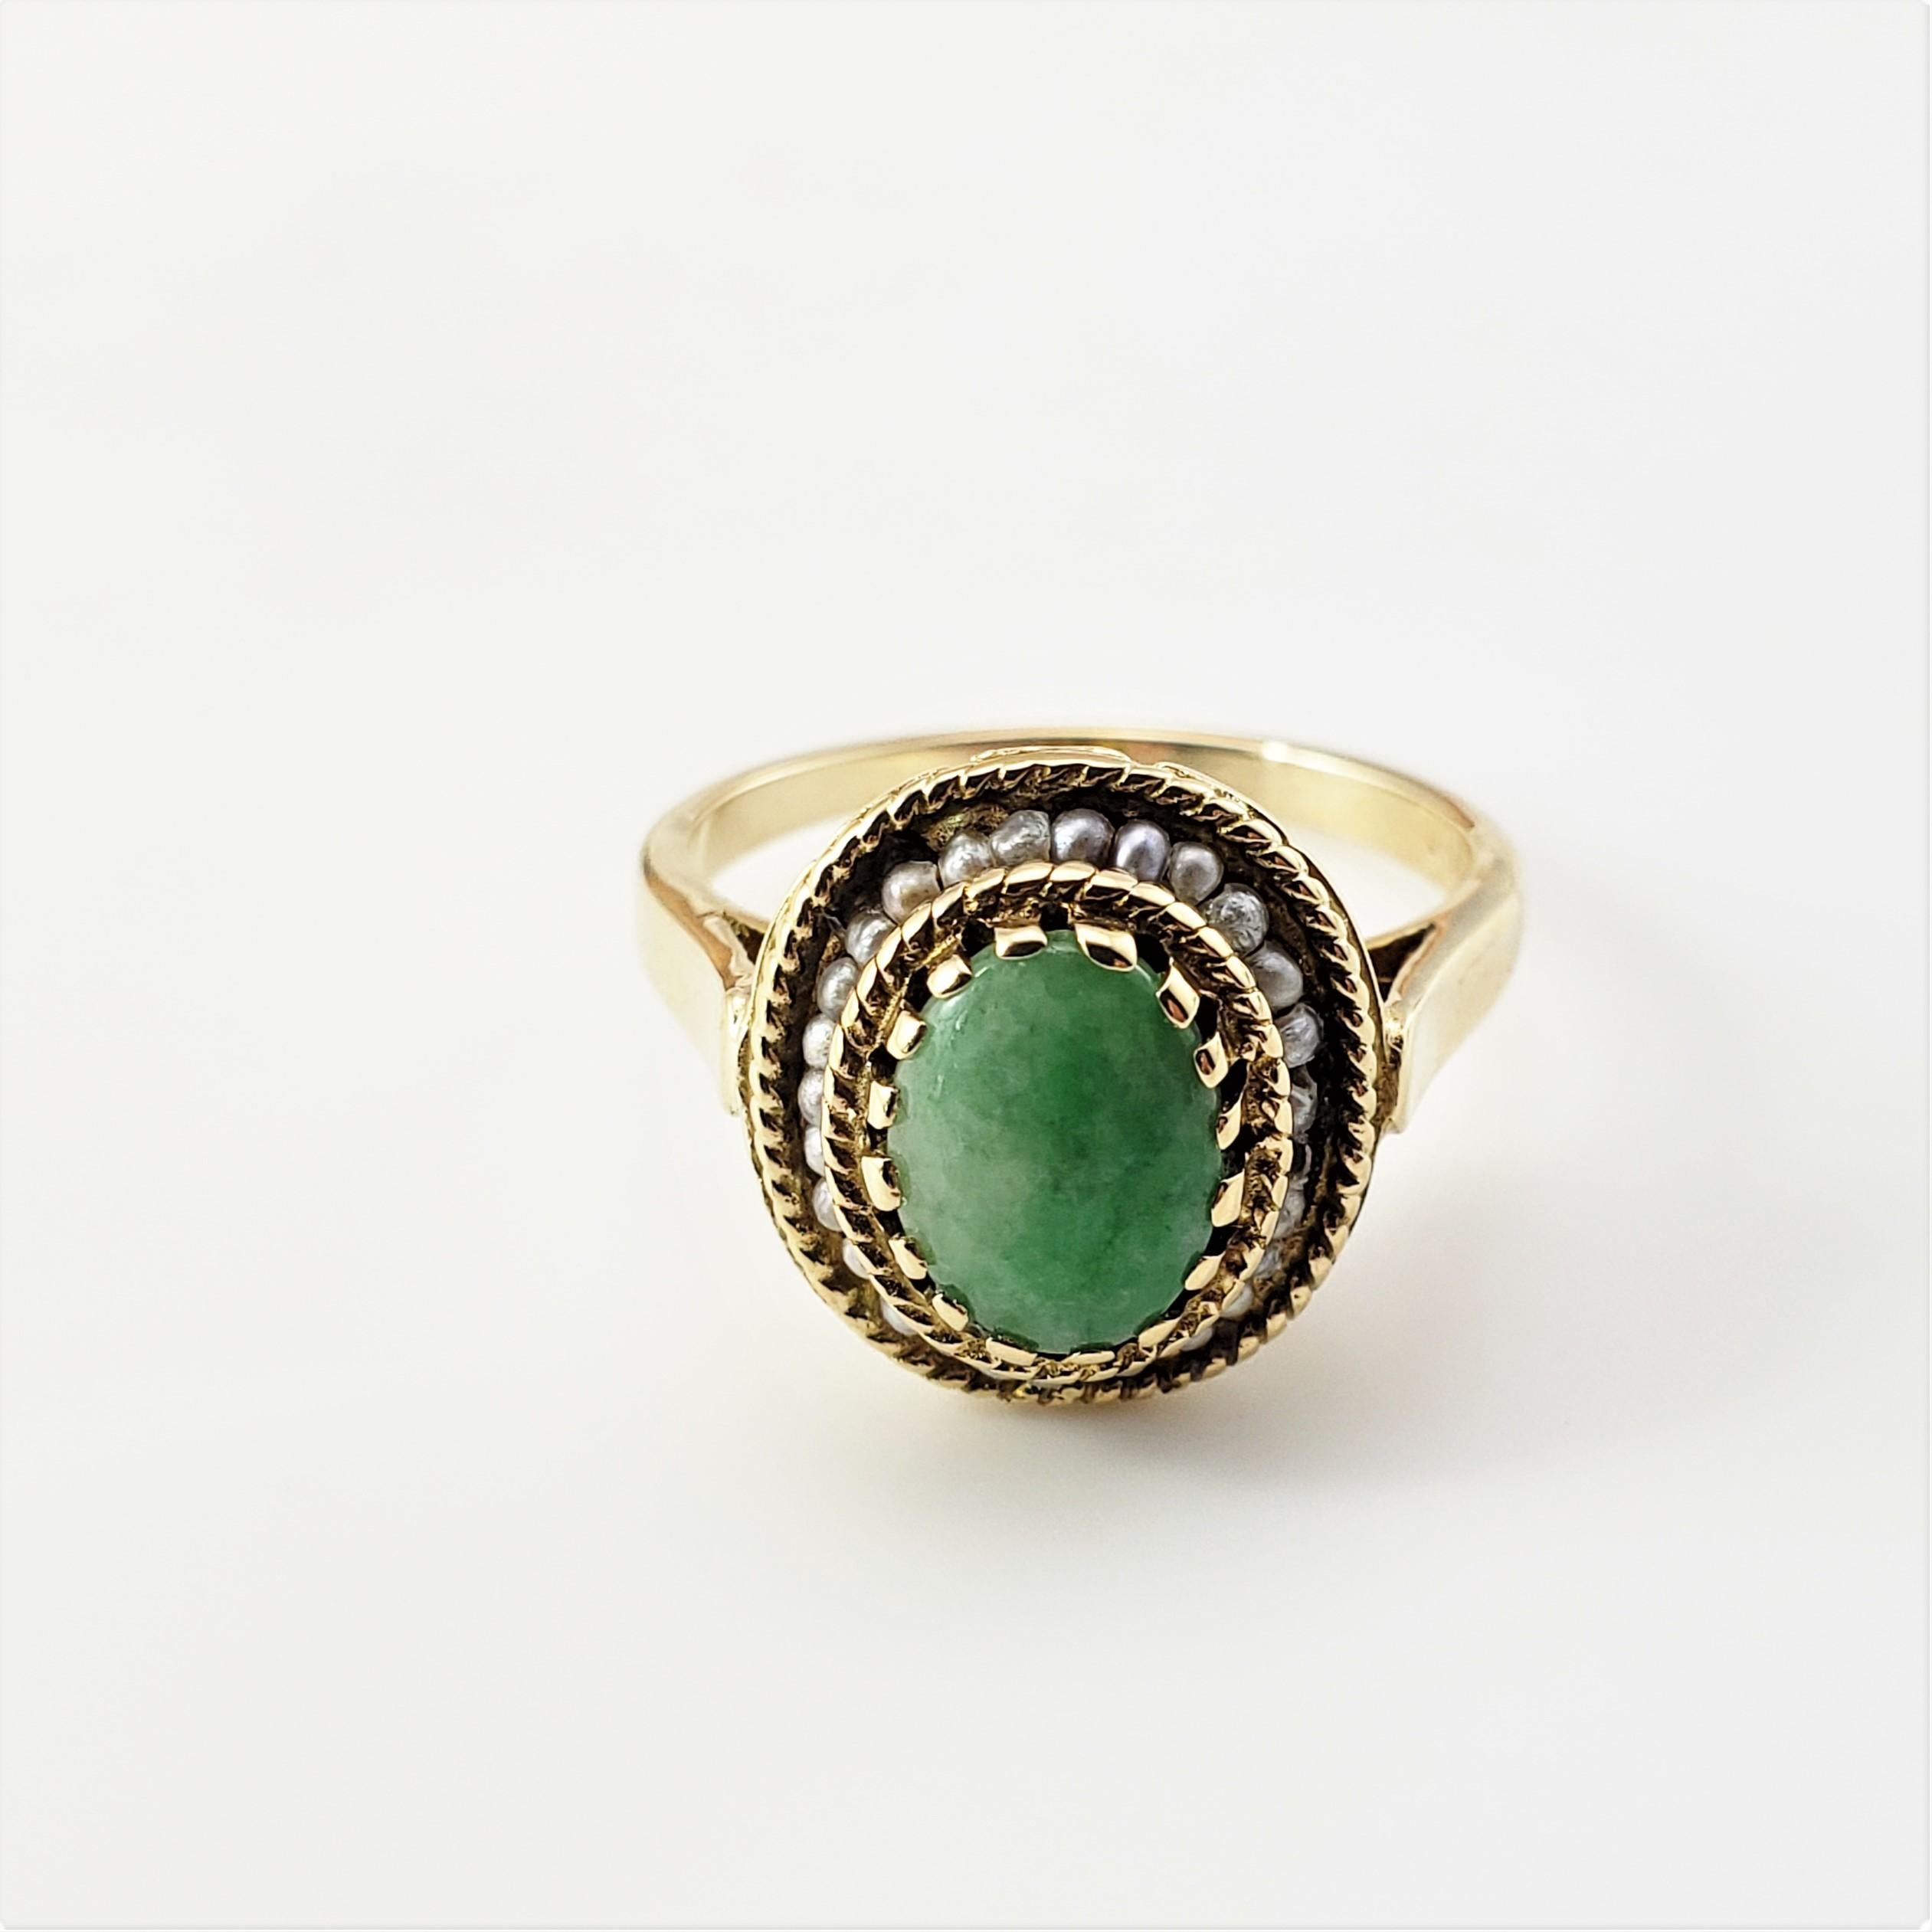 14 Karat Yellow Gold Jade and Seed Pearl Ring Size 6.25-

This lovely ring features one oval jade stone (9 mm x 7 mm) surrounded by seed pearls and set in beautifully detailed 14K yellow gold.
Shank: 2 mm.

Ring Size: 6.25

Weight:  2.5 dwt. / 3.9